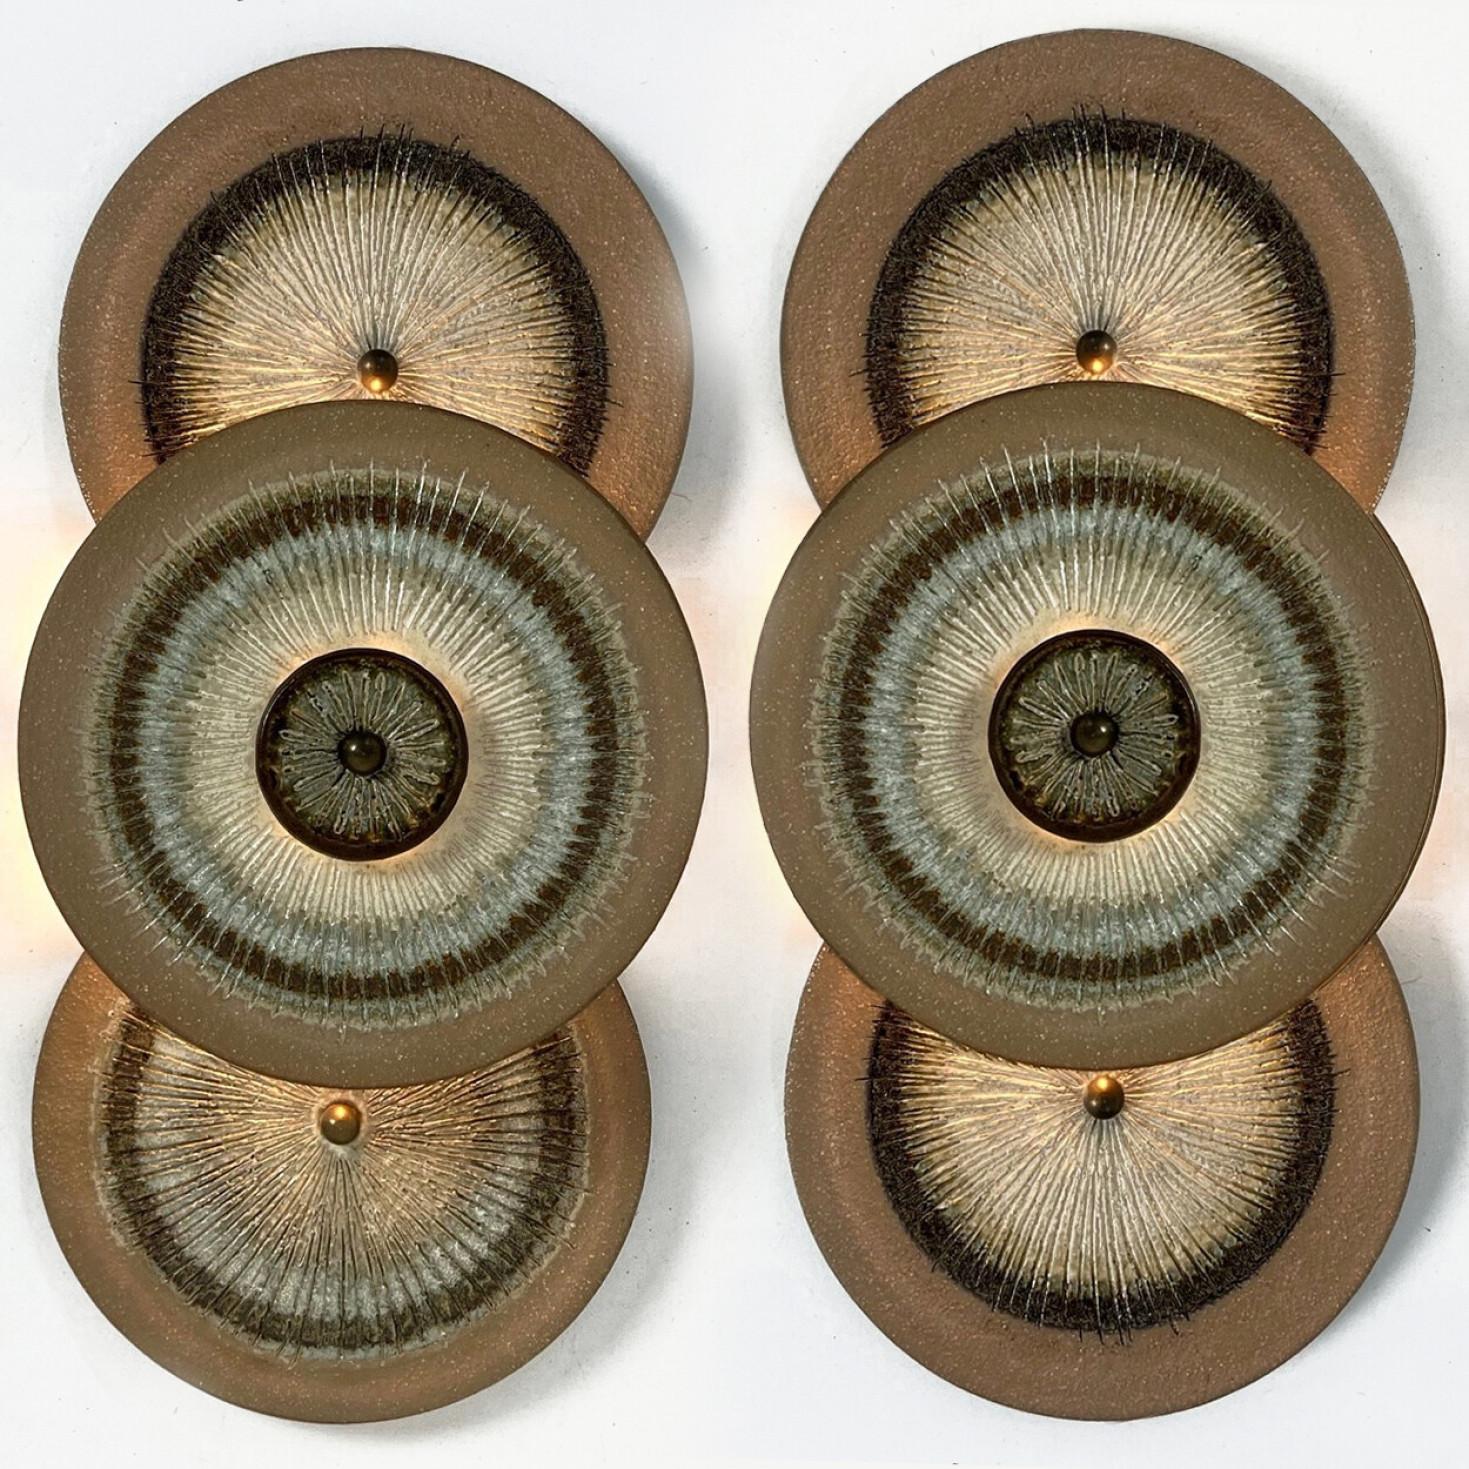 One of the Two spectacular circular ceramic wall lights, with beautiful  accents. Manufactured in Denmark in the 1970s.

A unique and playful set, real statement pieces in the room.

The lamps are Labelled and signed , in excellent condition. Axella